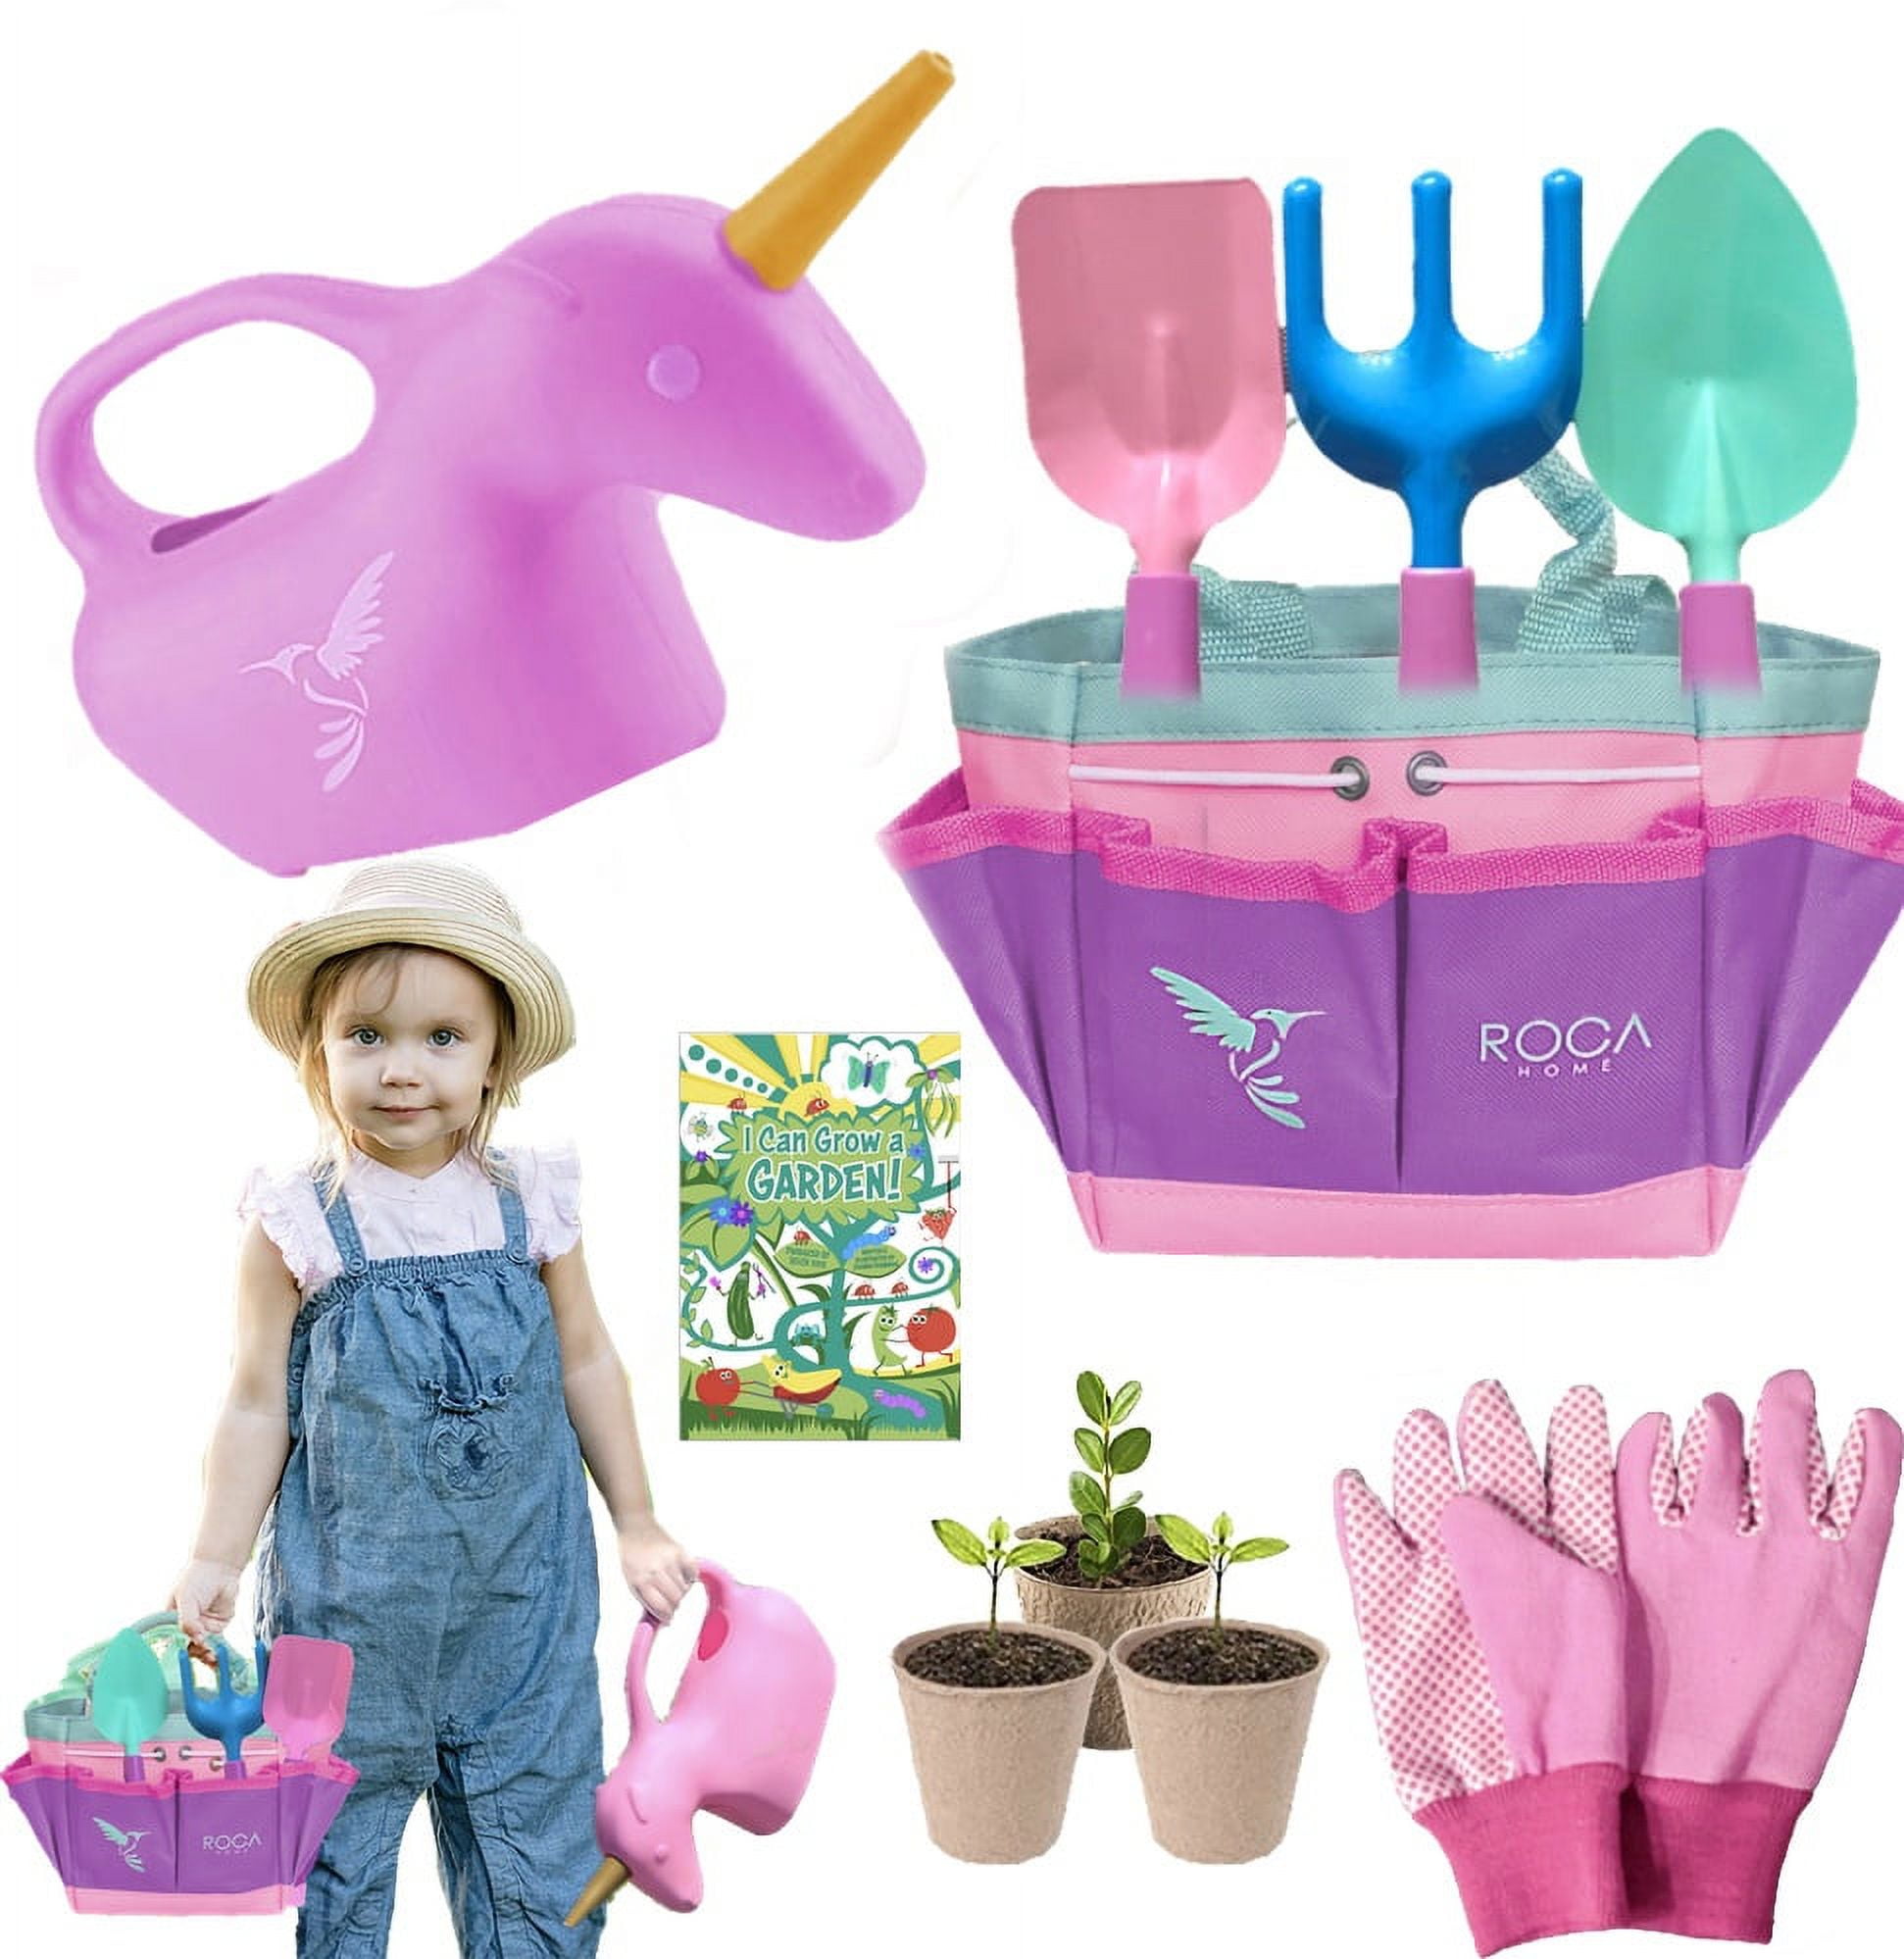 Pink Gardening Tools for Kids with Stem Early Learning Guide by Roca Toys. Garden Tools Toys, Outdoor Toys and Learning Toys